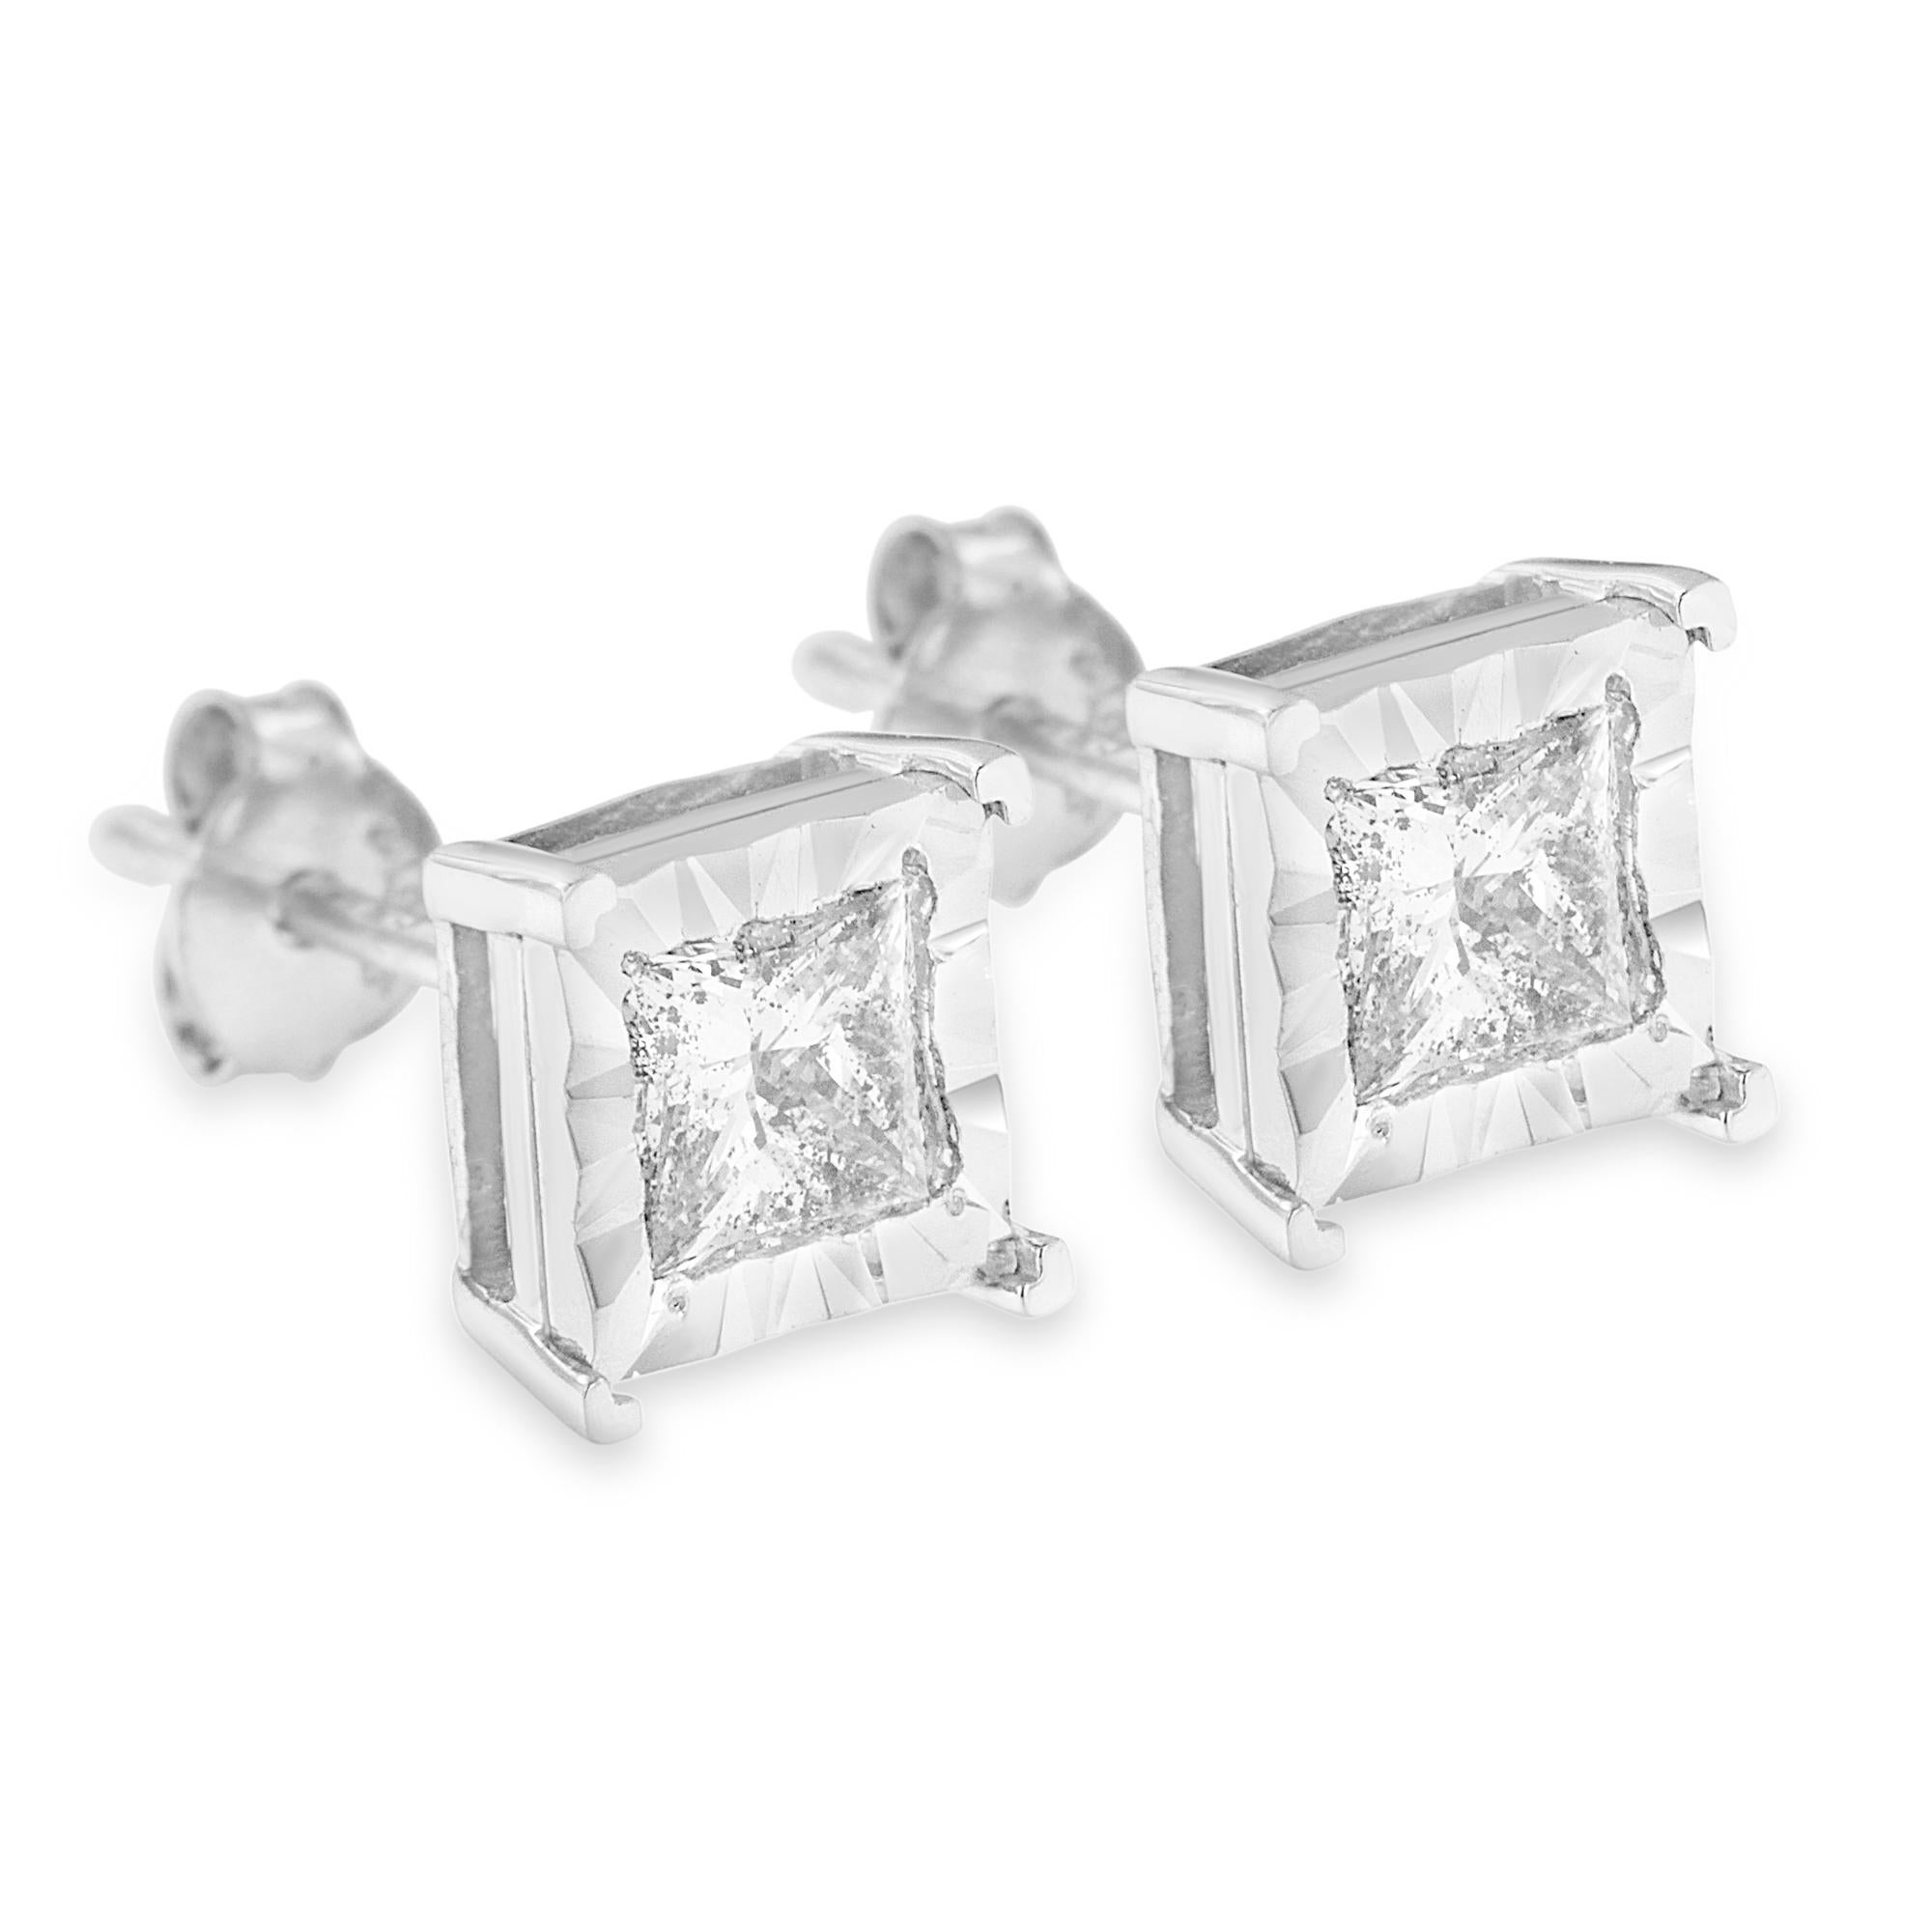 Princess Cut .925 Sterling Silver 1 1/4 Carat Diamond Solitaire Stud Earrings For Sale